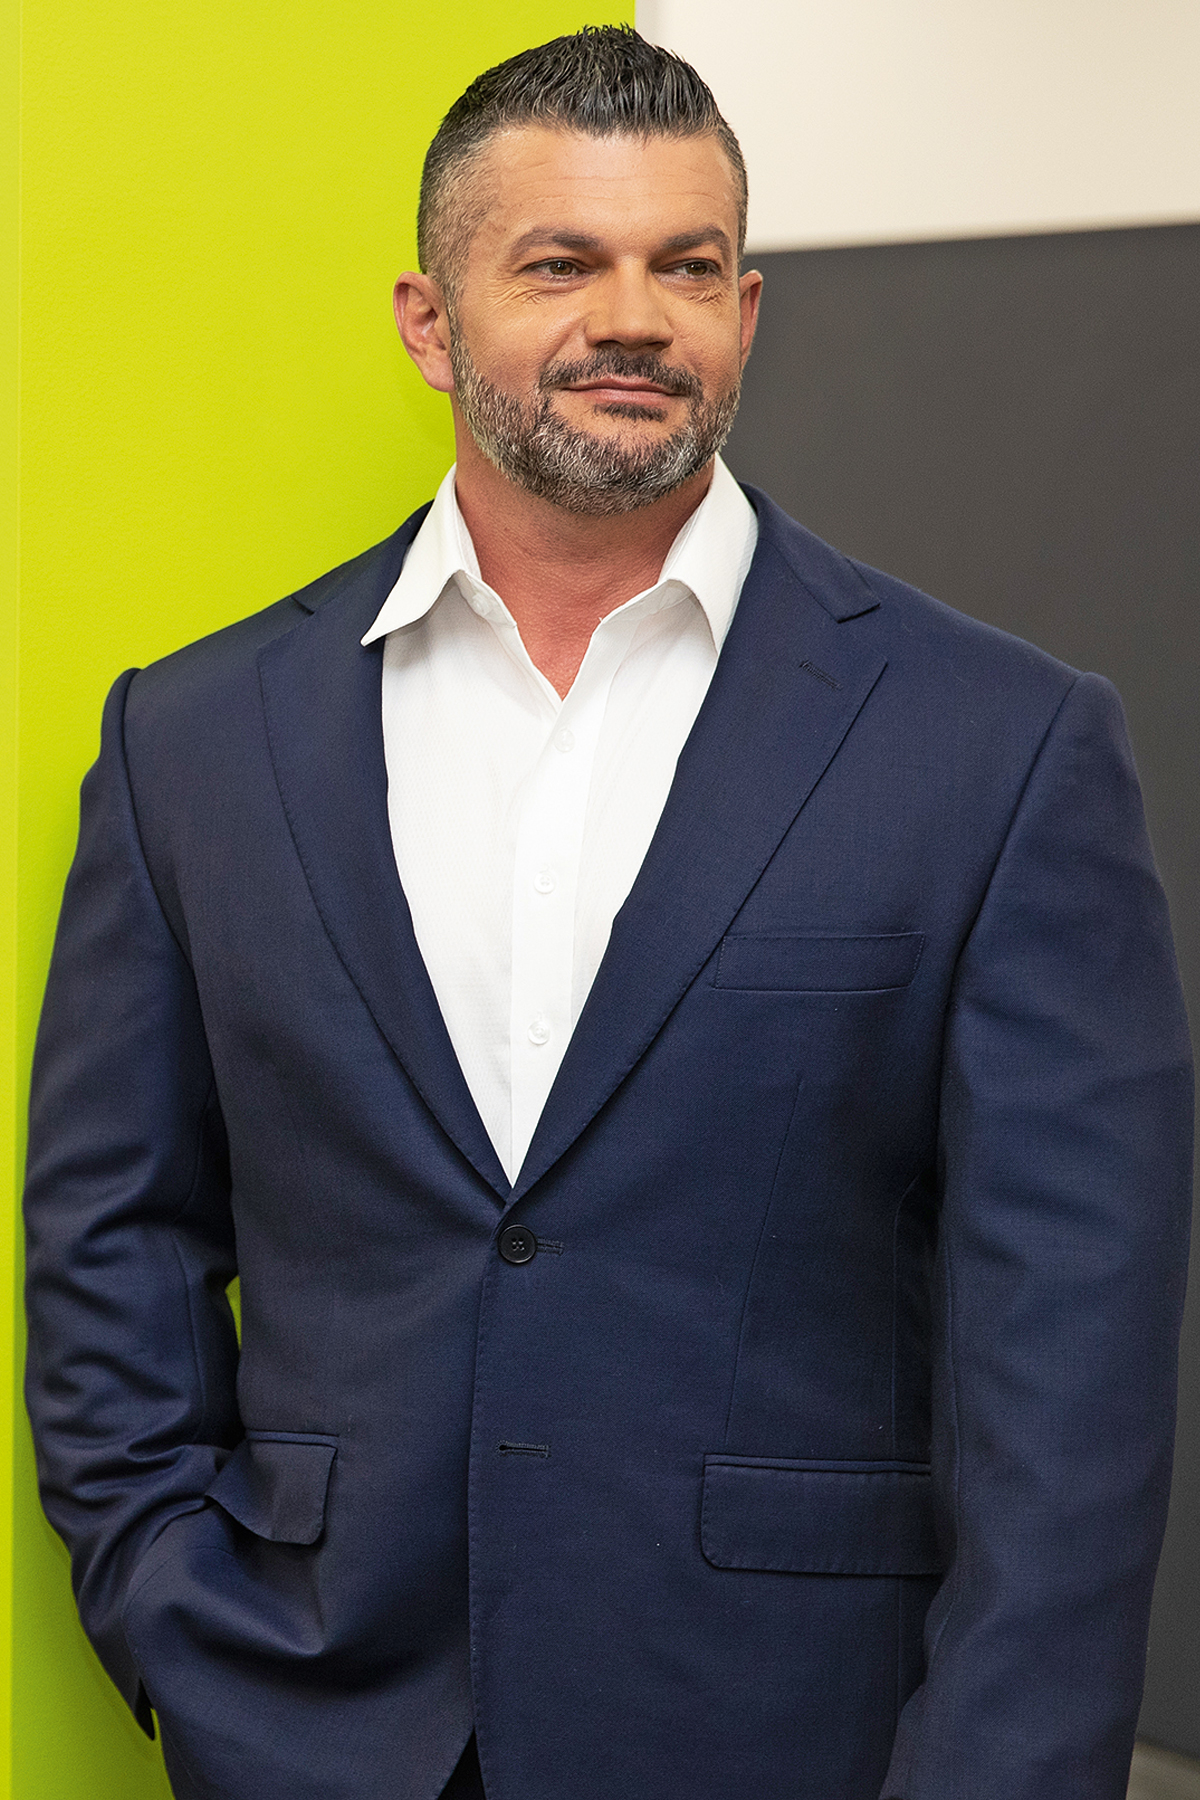 Nick Argyropoulos, Managing Director of NA Group